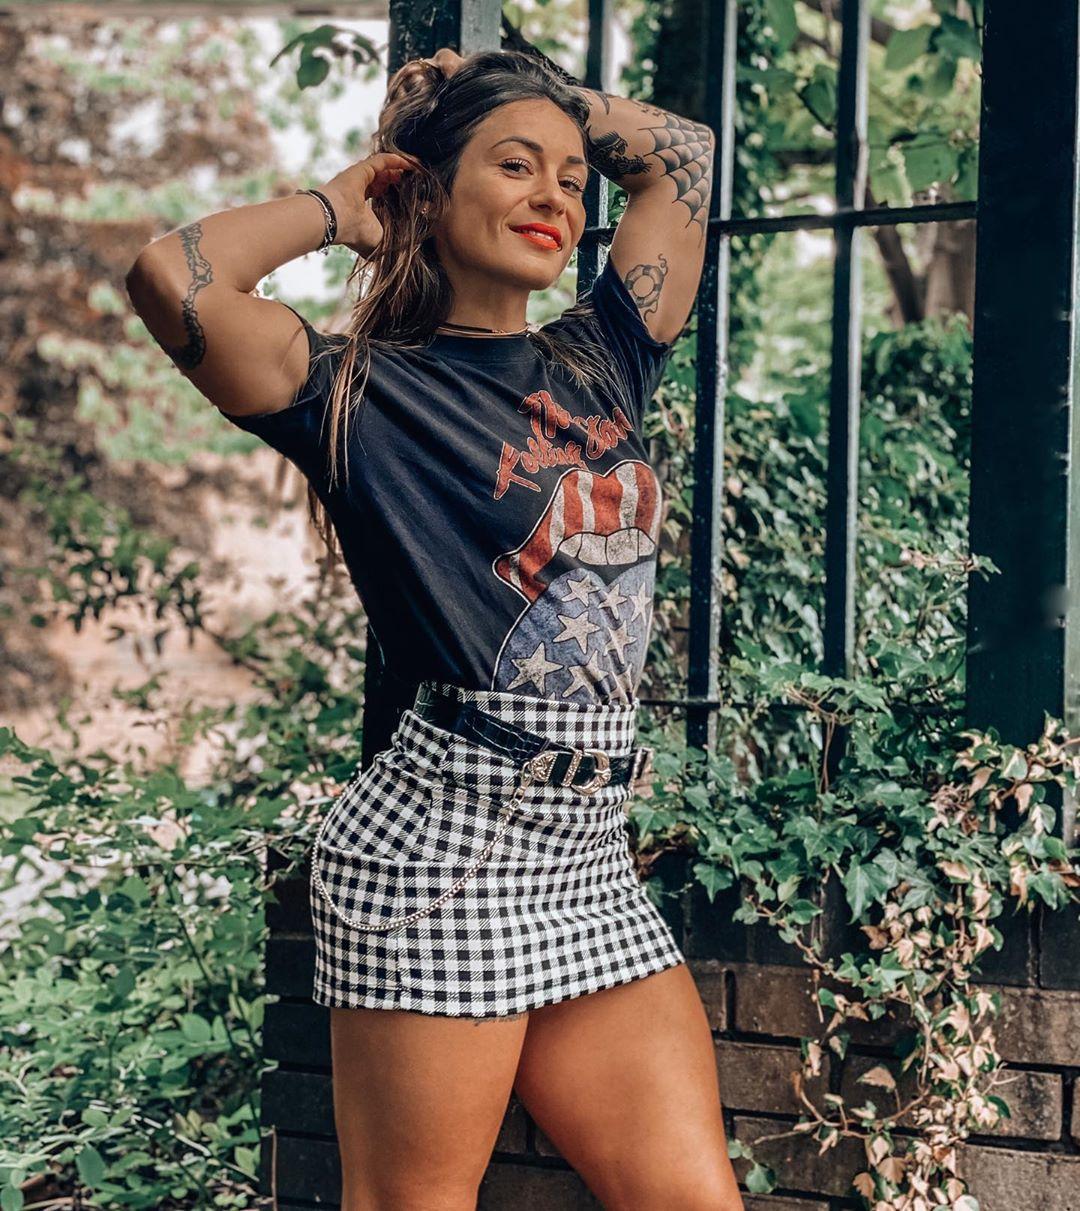 51 Hot Pictures Of Celia Gabbiani Which Make Certain To Grab Your Eye 631